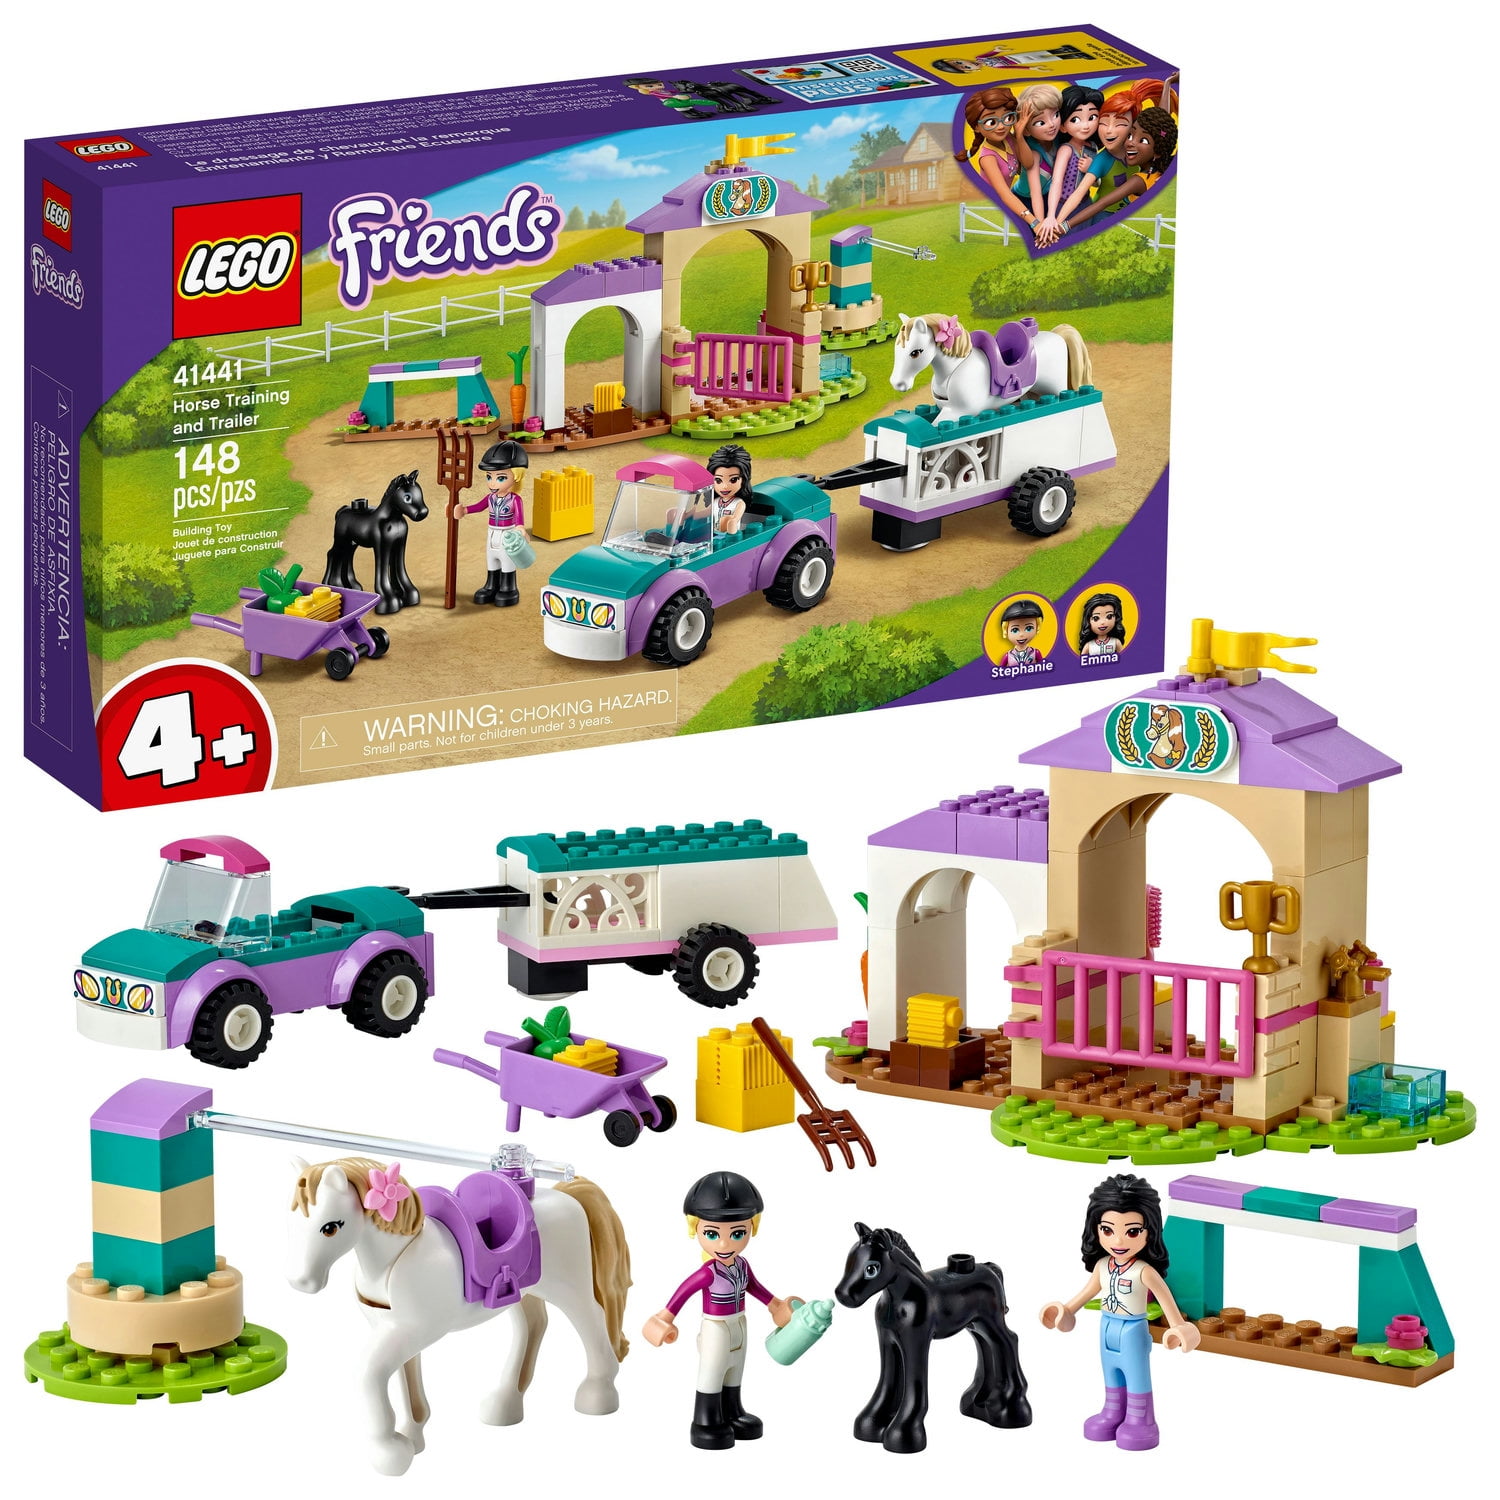 Friends Horse Training and Trailer 41441 Building Toy; With LEGO Stephanie and Emma (148 Pieces) - Walmart.com